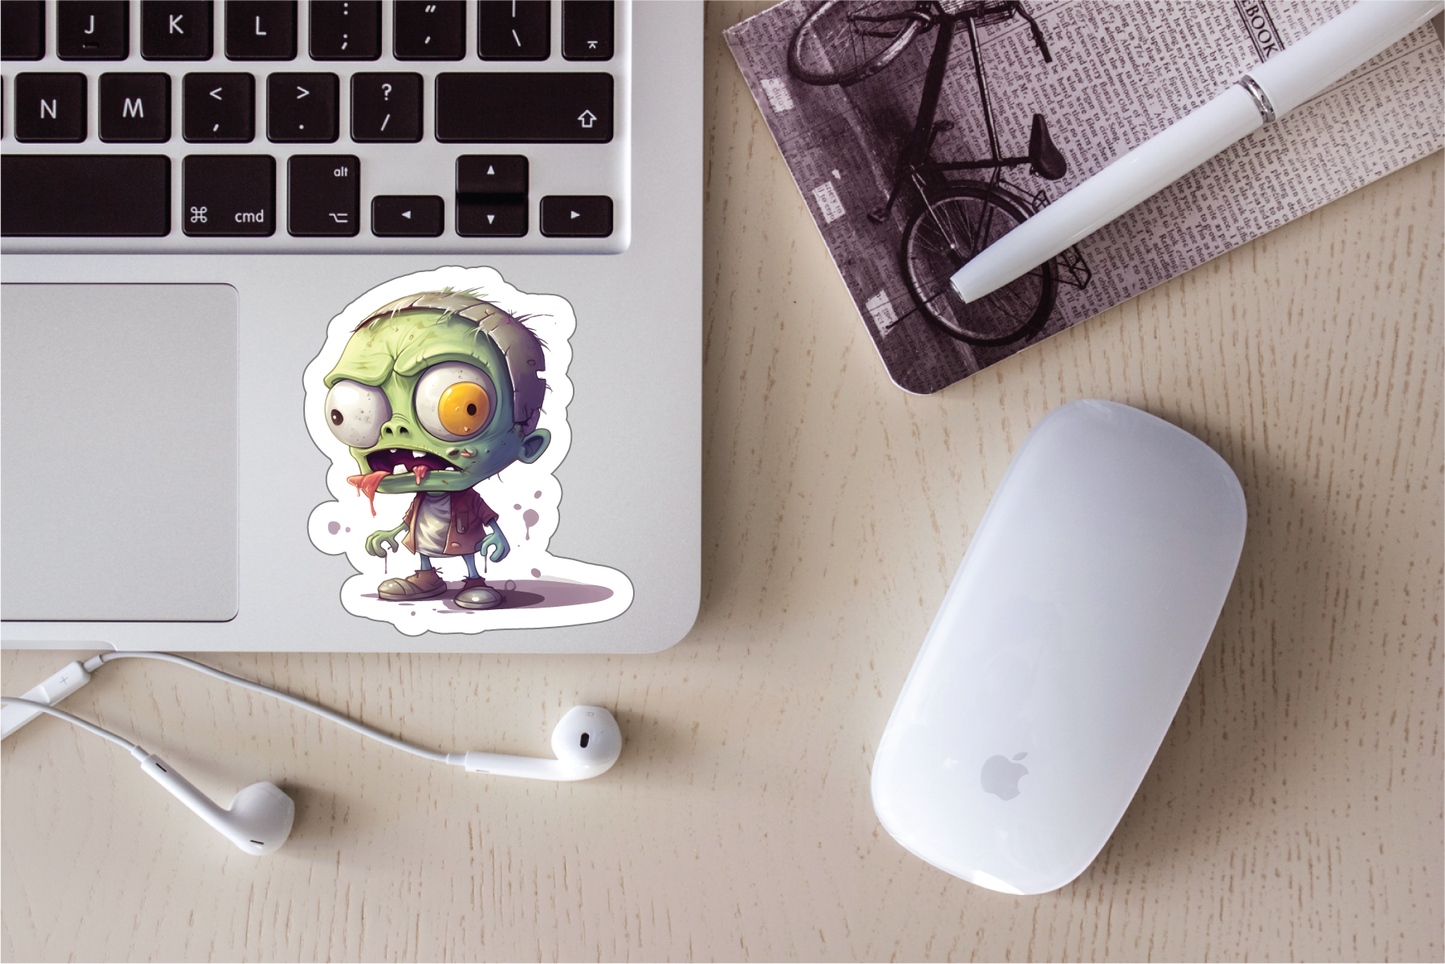 Cute Zombies - Full Color Vinyl Stickers (SHIPS IN 3-7 BUS DAYS)